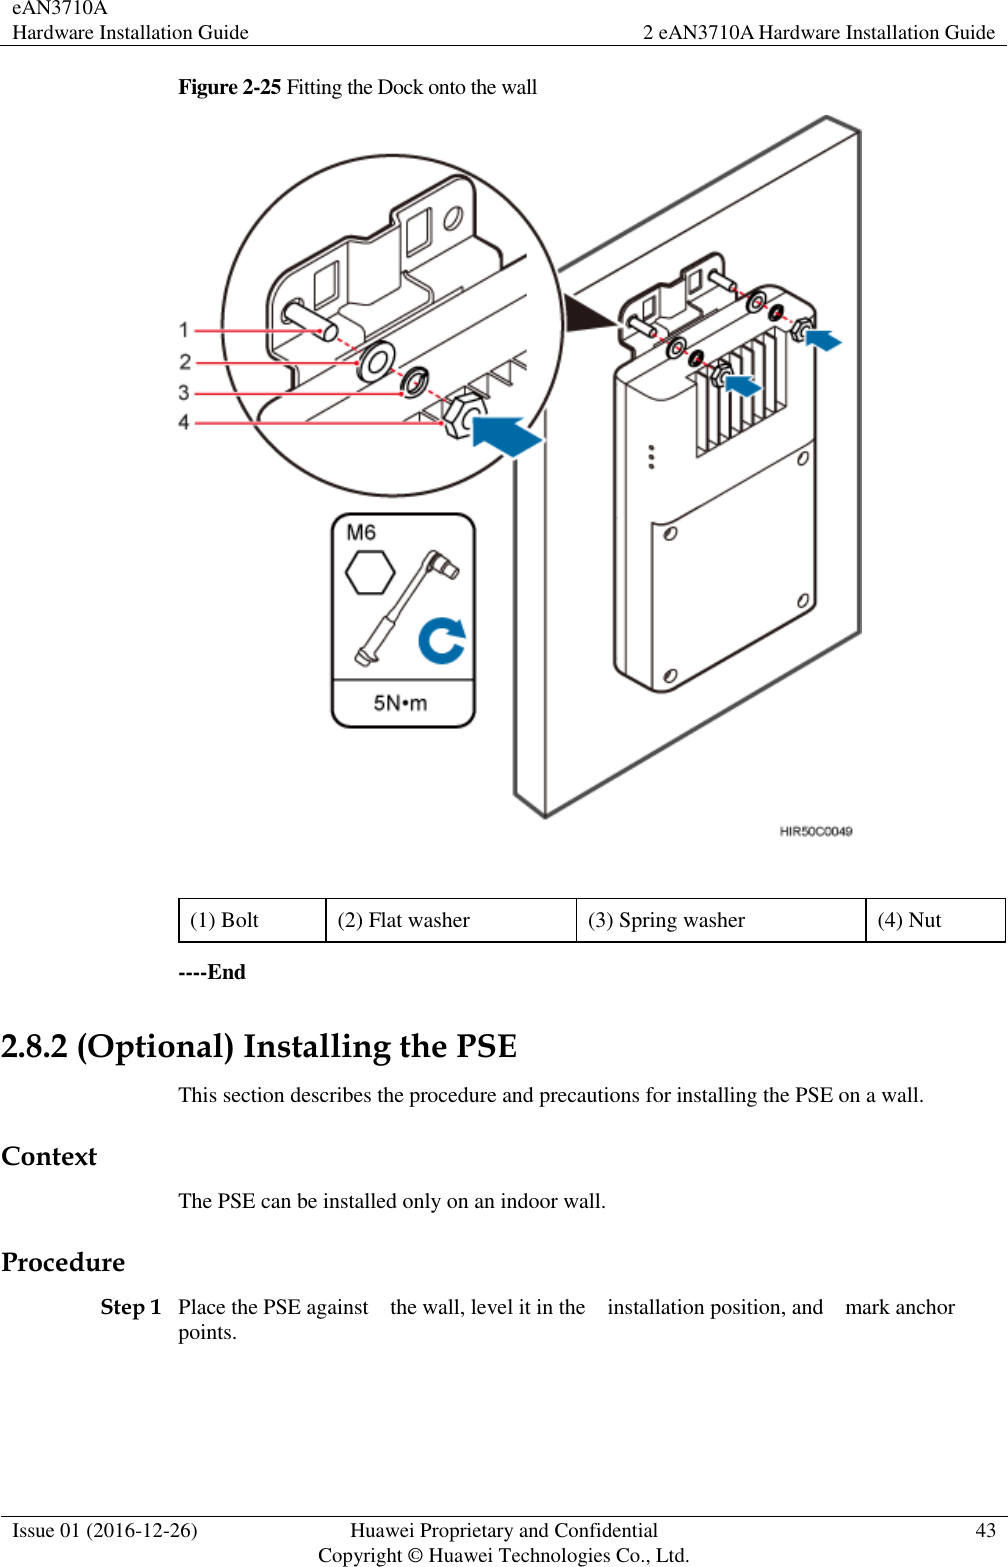 eAN3710A Hardware Installation Guide 2 eAN3710A Hardware Installation Guide  Issue 01 (2016-12-26) Huawei Proprietary and Confidential                                     Copyright © Huawei Technologies Co., Ltd. 43  Figure 2-25 Fitting the Dock onto the wall   (1) Bolt (2) Flat washer (3) Spring washer (4) Nut ----End 2.8.2 (Optional) Installing the PSE This section describes the procedure and precautions for installing the PSE on a wall. Context The PSE can be installed only on an indoor wall. Procedure Step 1 Place the PSE against    the wall, level it in the    installation position, and    mark anchor points. 